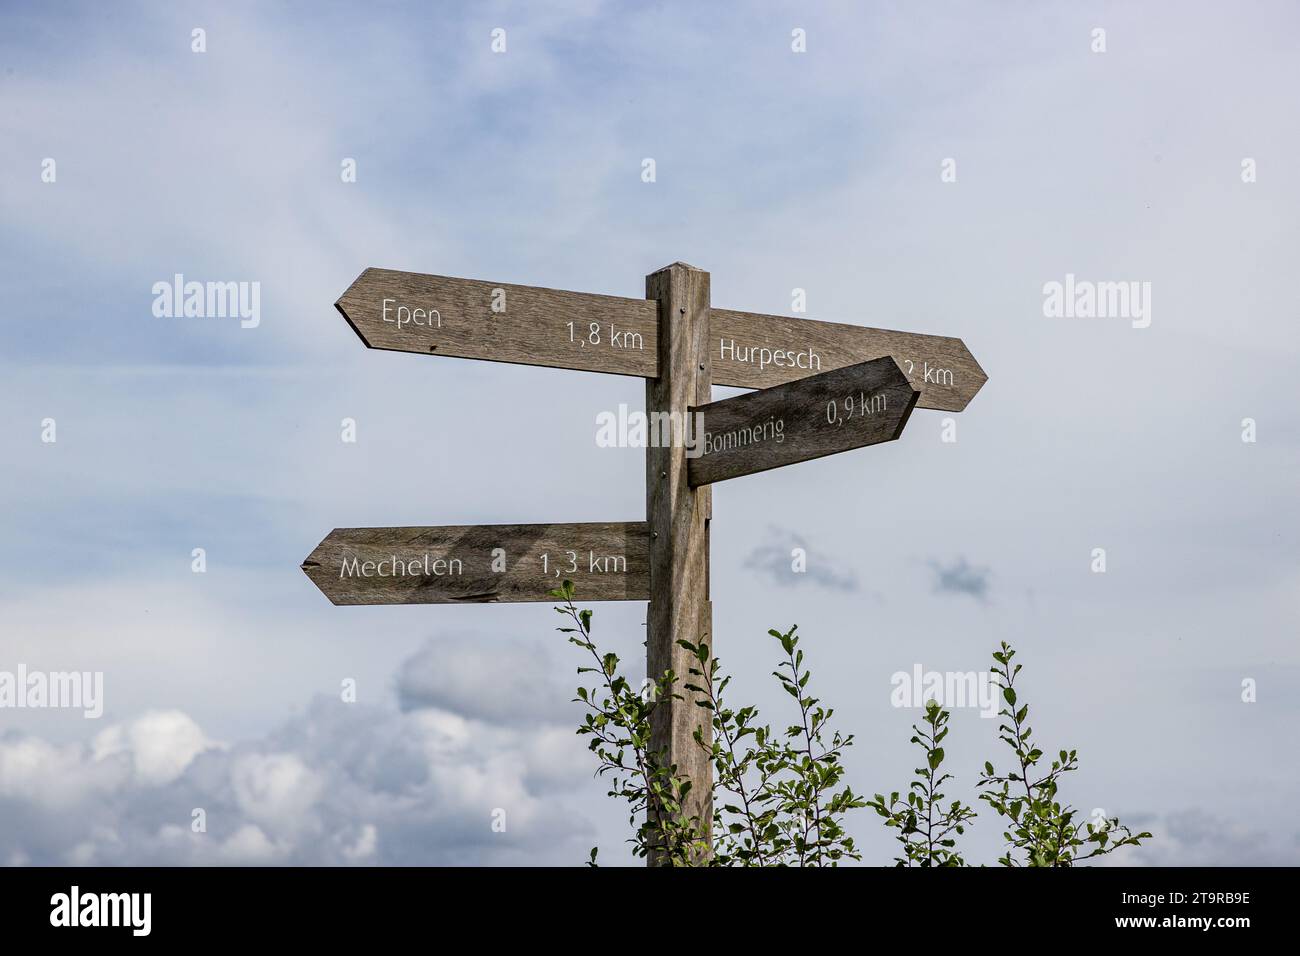 Wooden signpost at crossroads in Gulpen-Wittem region against cloud-covered sky, towards towns: Epen, Hurpesch, Bommering and Mechelen, hiking trails, Stock Photo